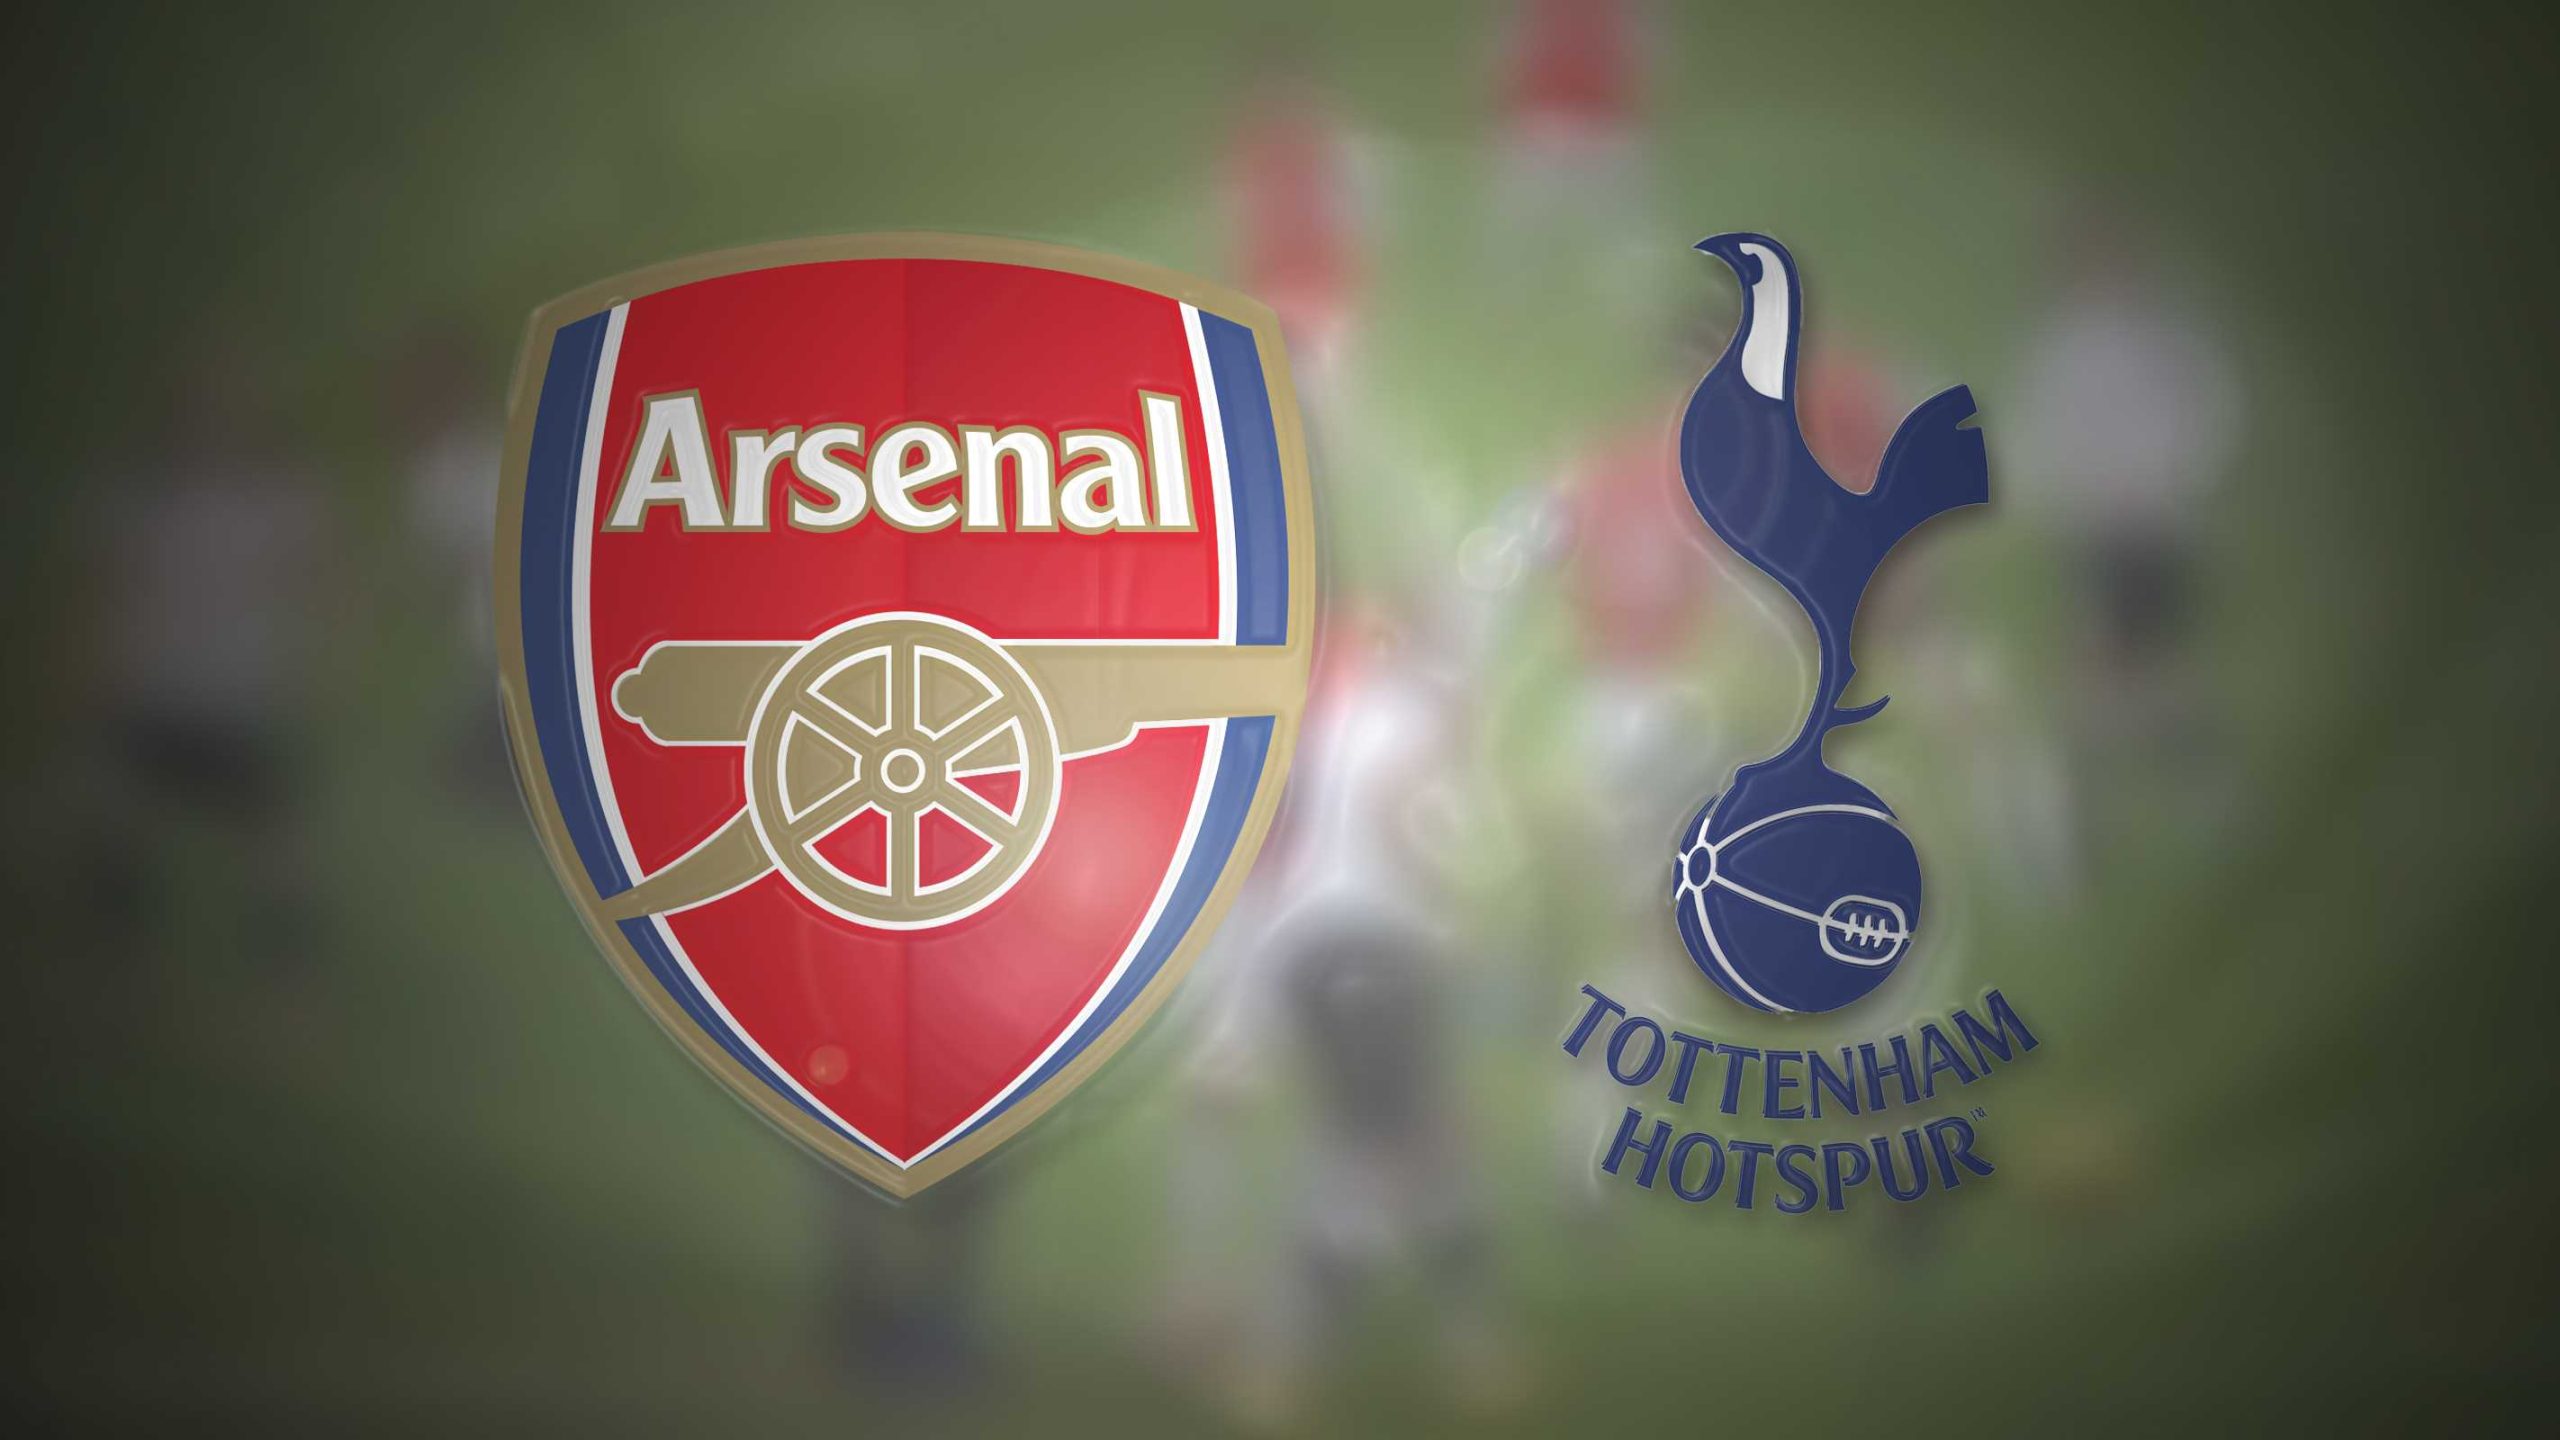 Arsenal vs. Spurs: A North London Derby Passion Ignites